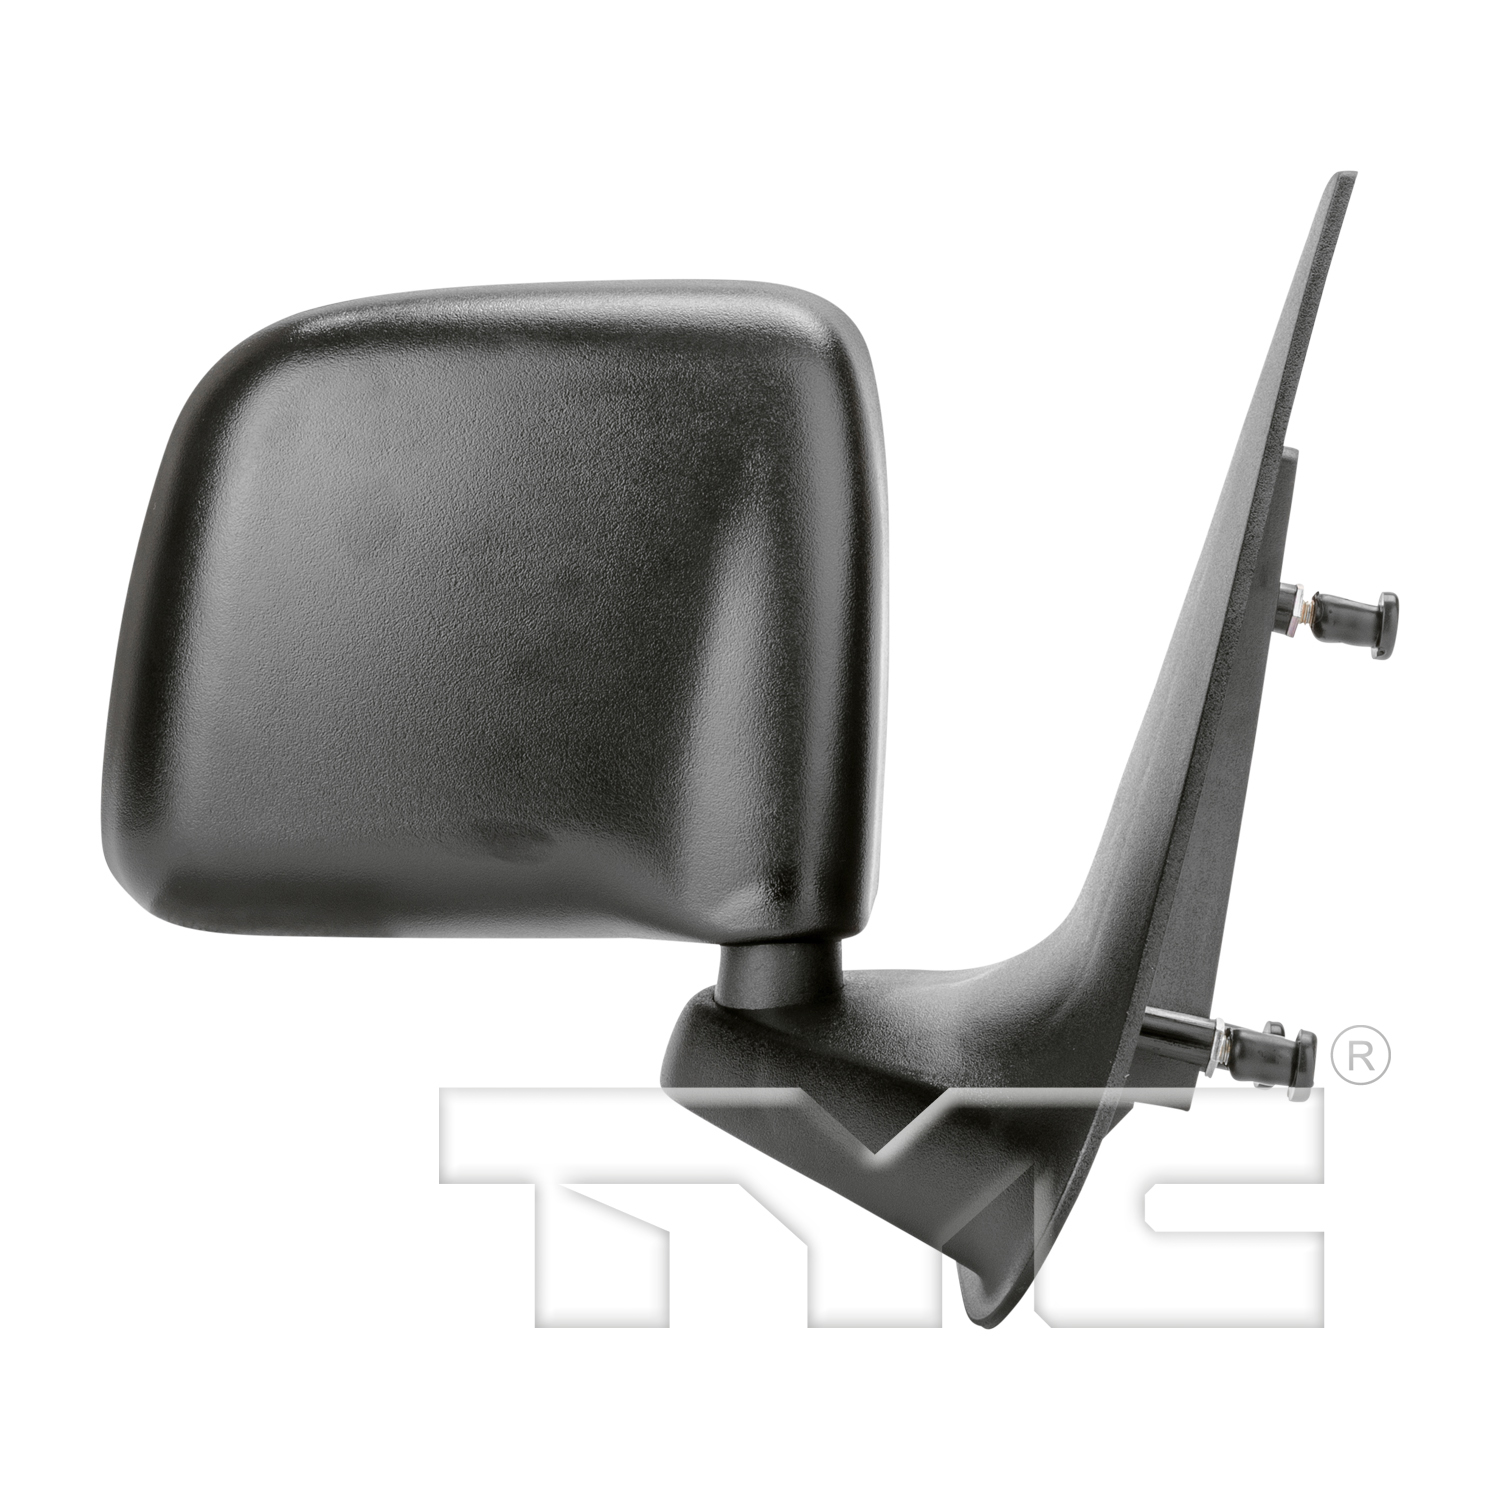 Aftermarket MIRRORS for MAZDA - B3000, B3000,94-98,RT Mirror outside rear view